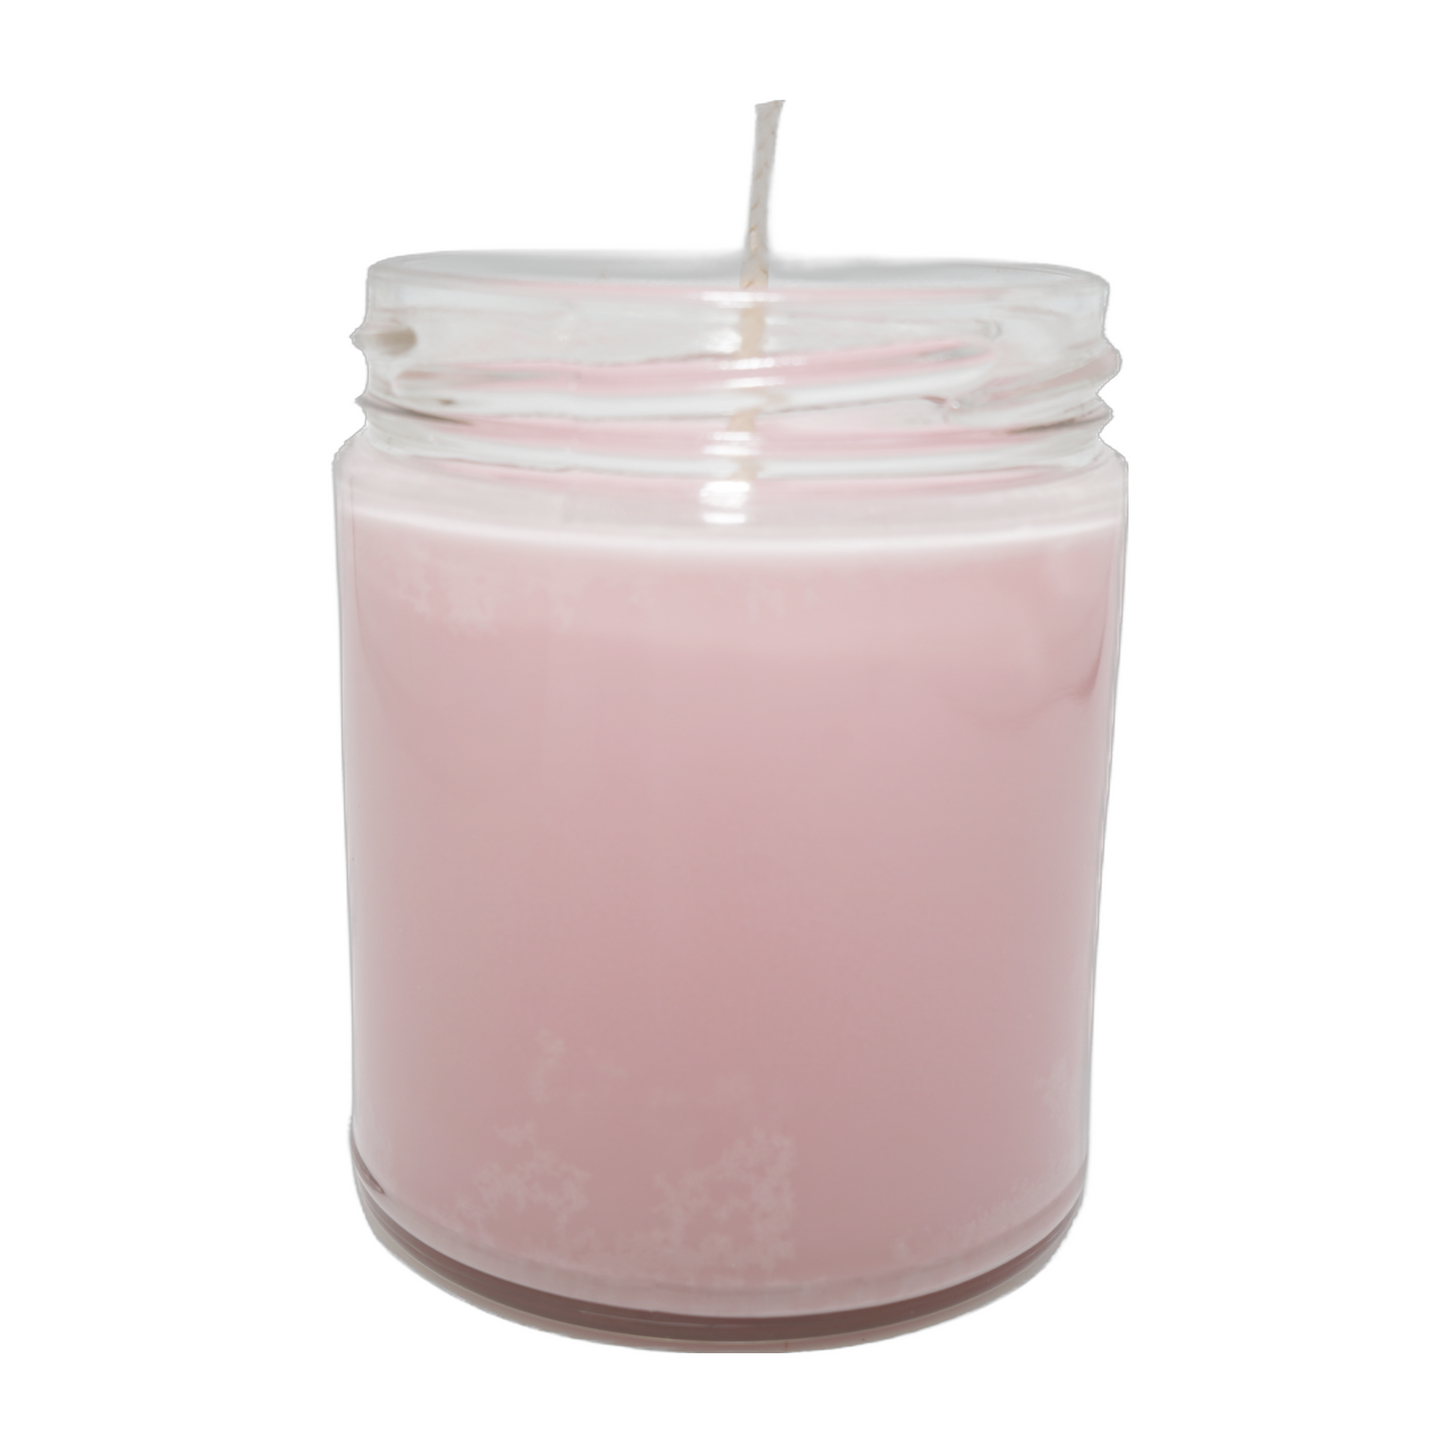 Japanese Cherry Blossom 8oz Soy Candle